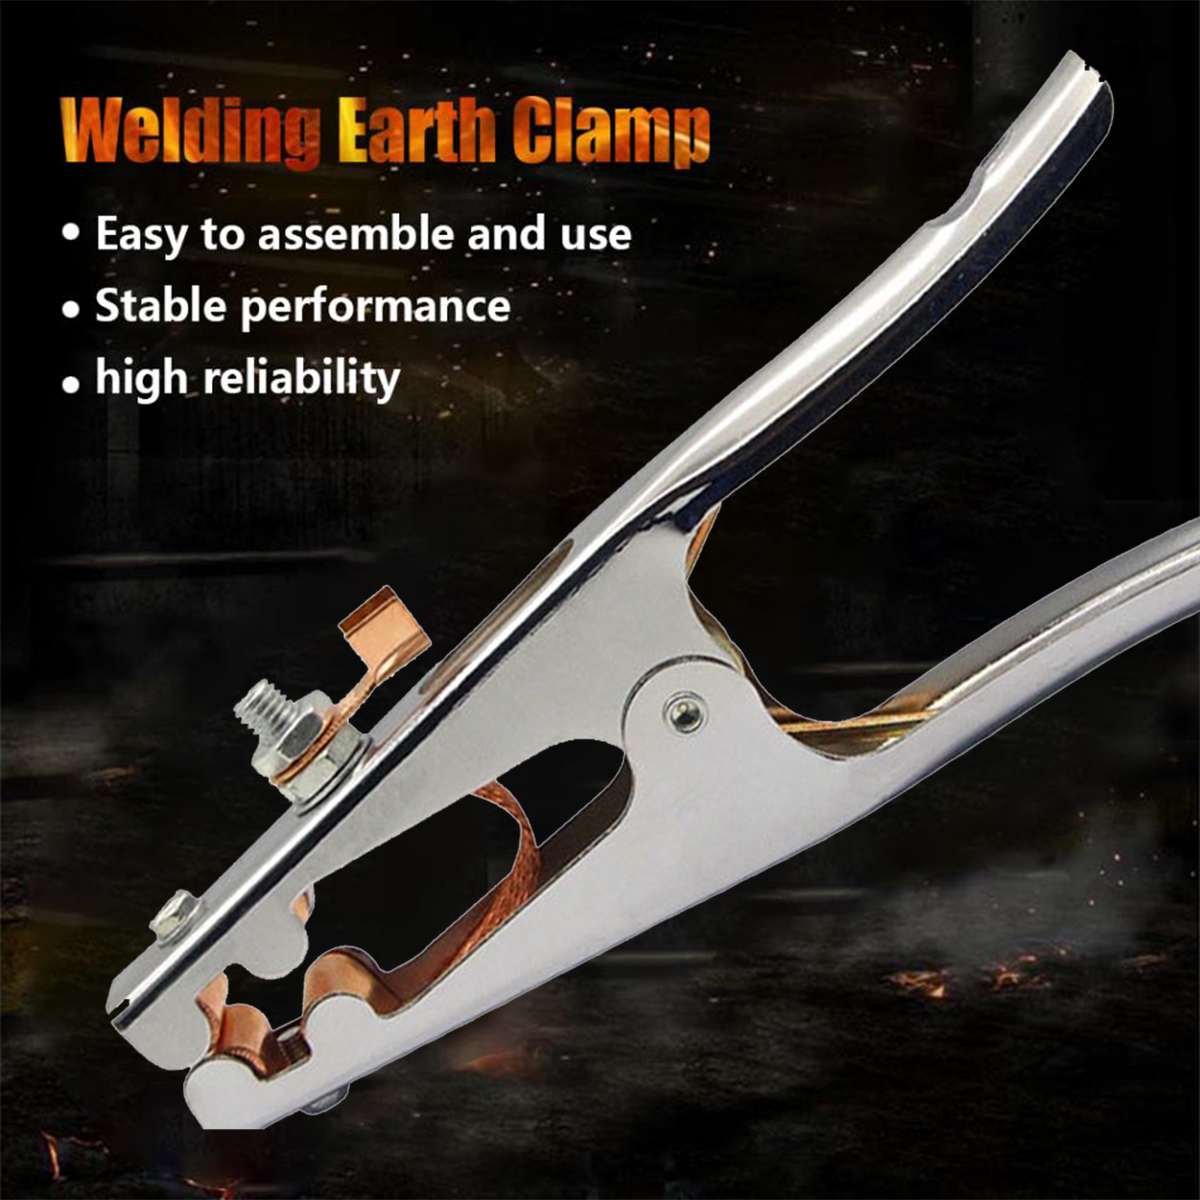 300A Current Earth Ground Cable Clip Clamp Welding Manual Welder Electrode Holder Welding Processing Ground Clamp Welder Tools